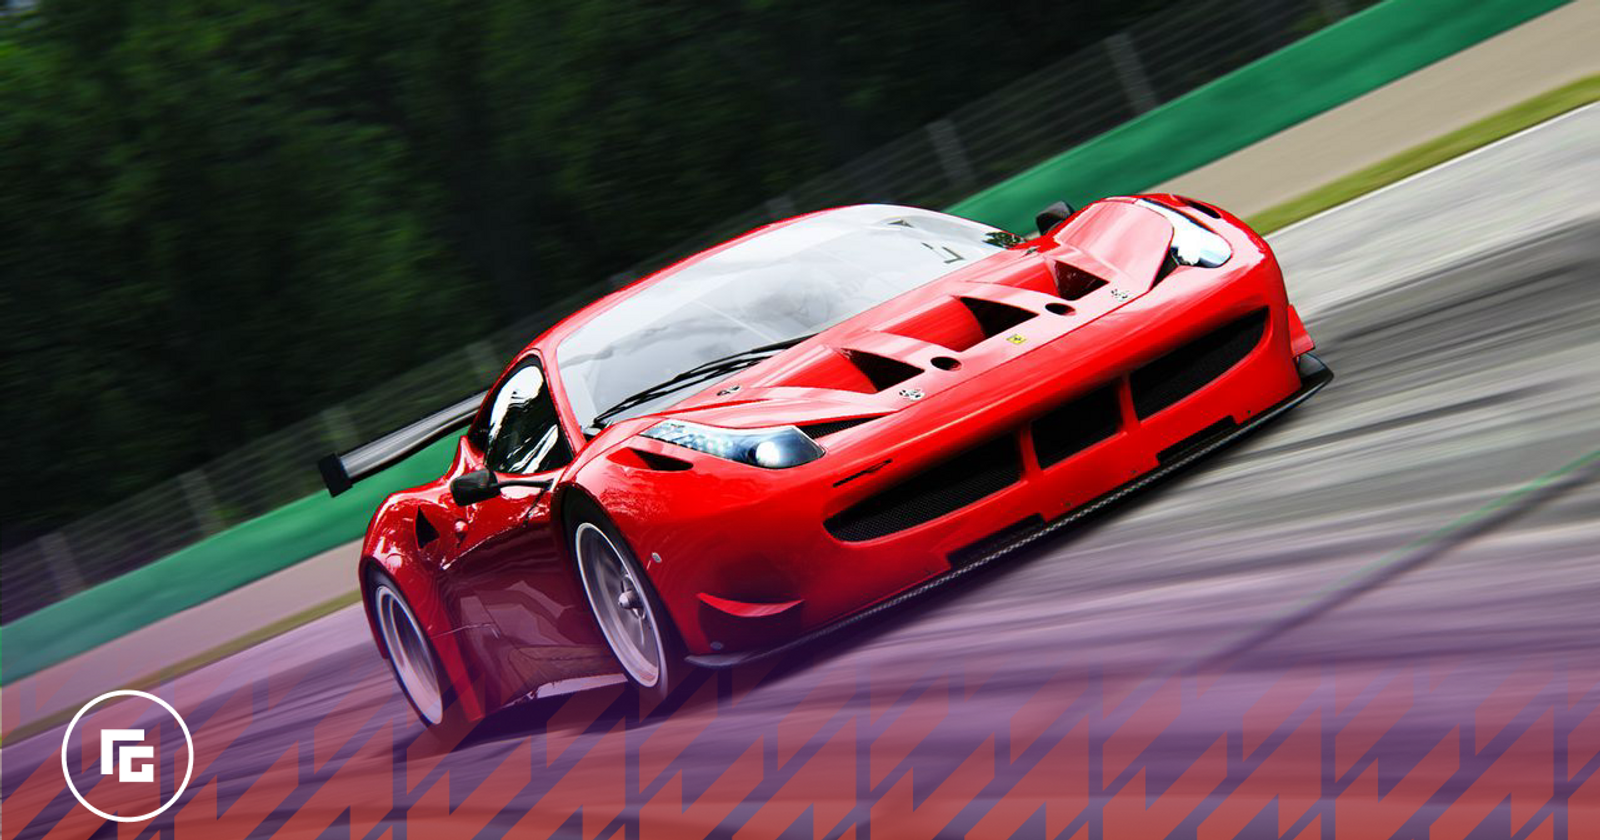 Why Assetto Corsa 2 will use a brand new game engine